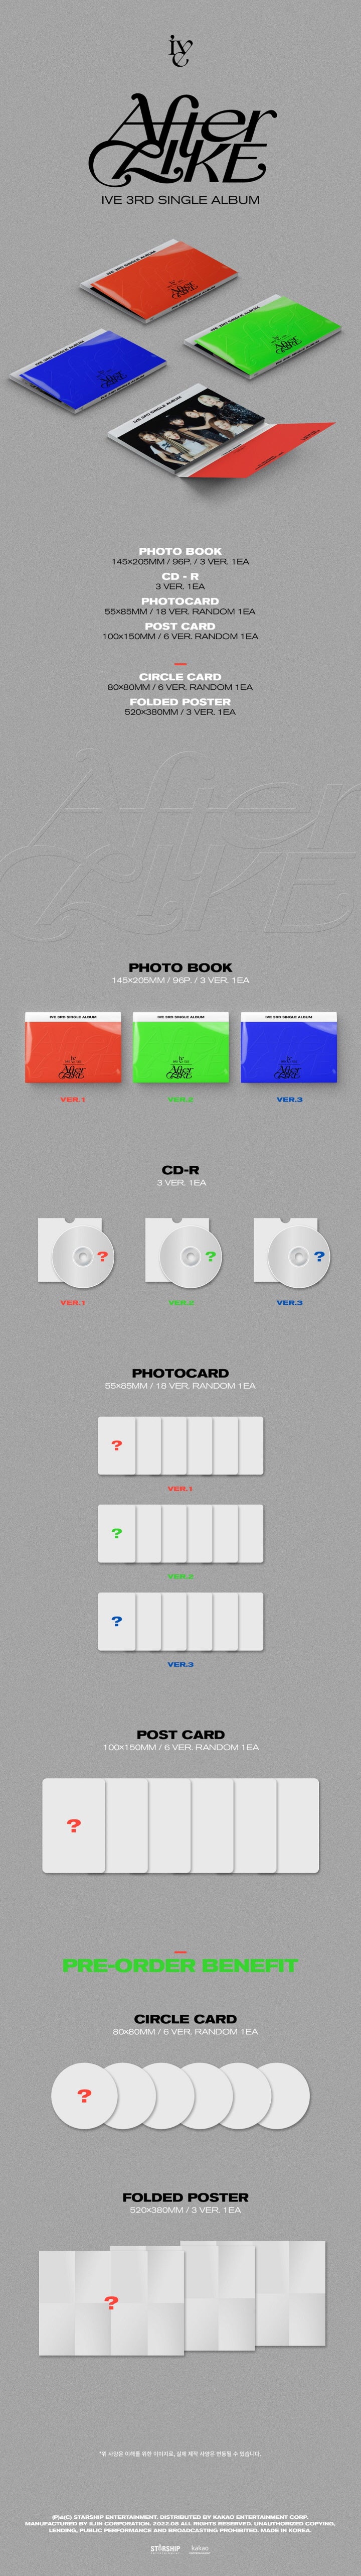 1 CD
1 Photo Book (96 pages)
1 Photo Card (random out of 18 types)
1 Postcard (random out of 6 types)